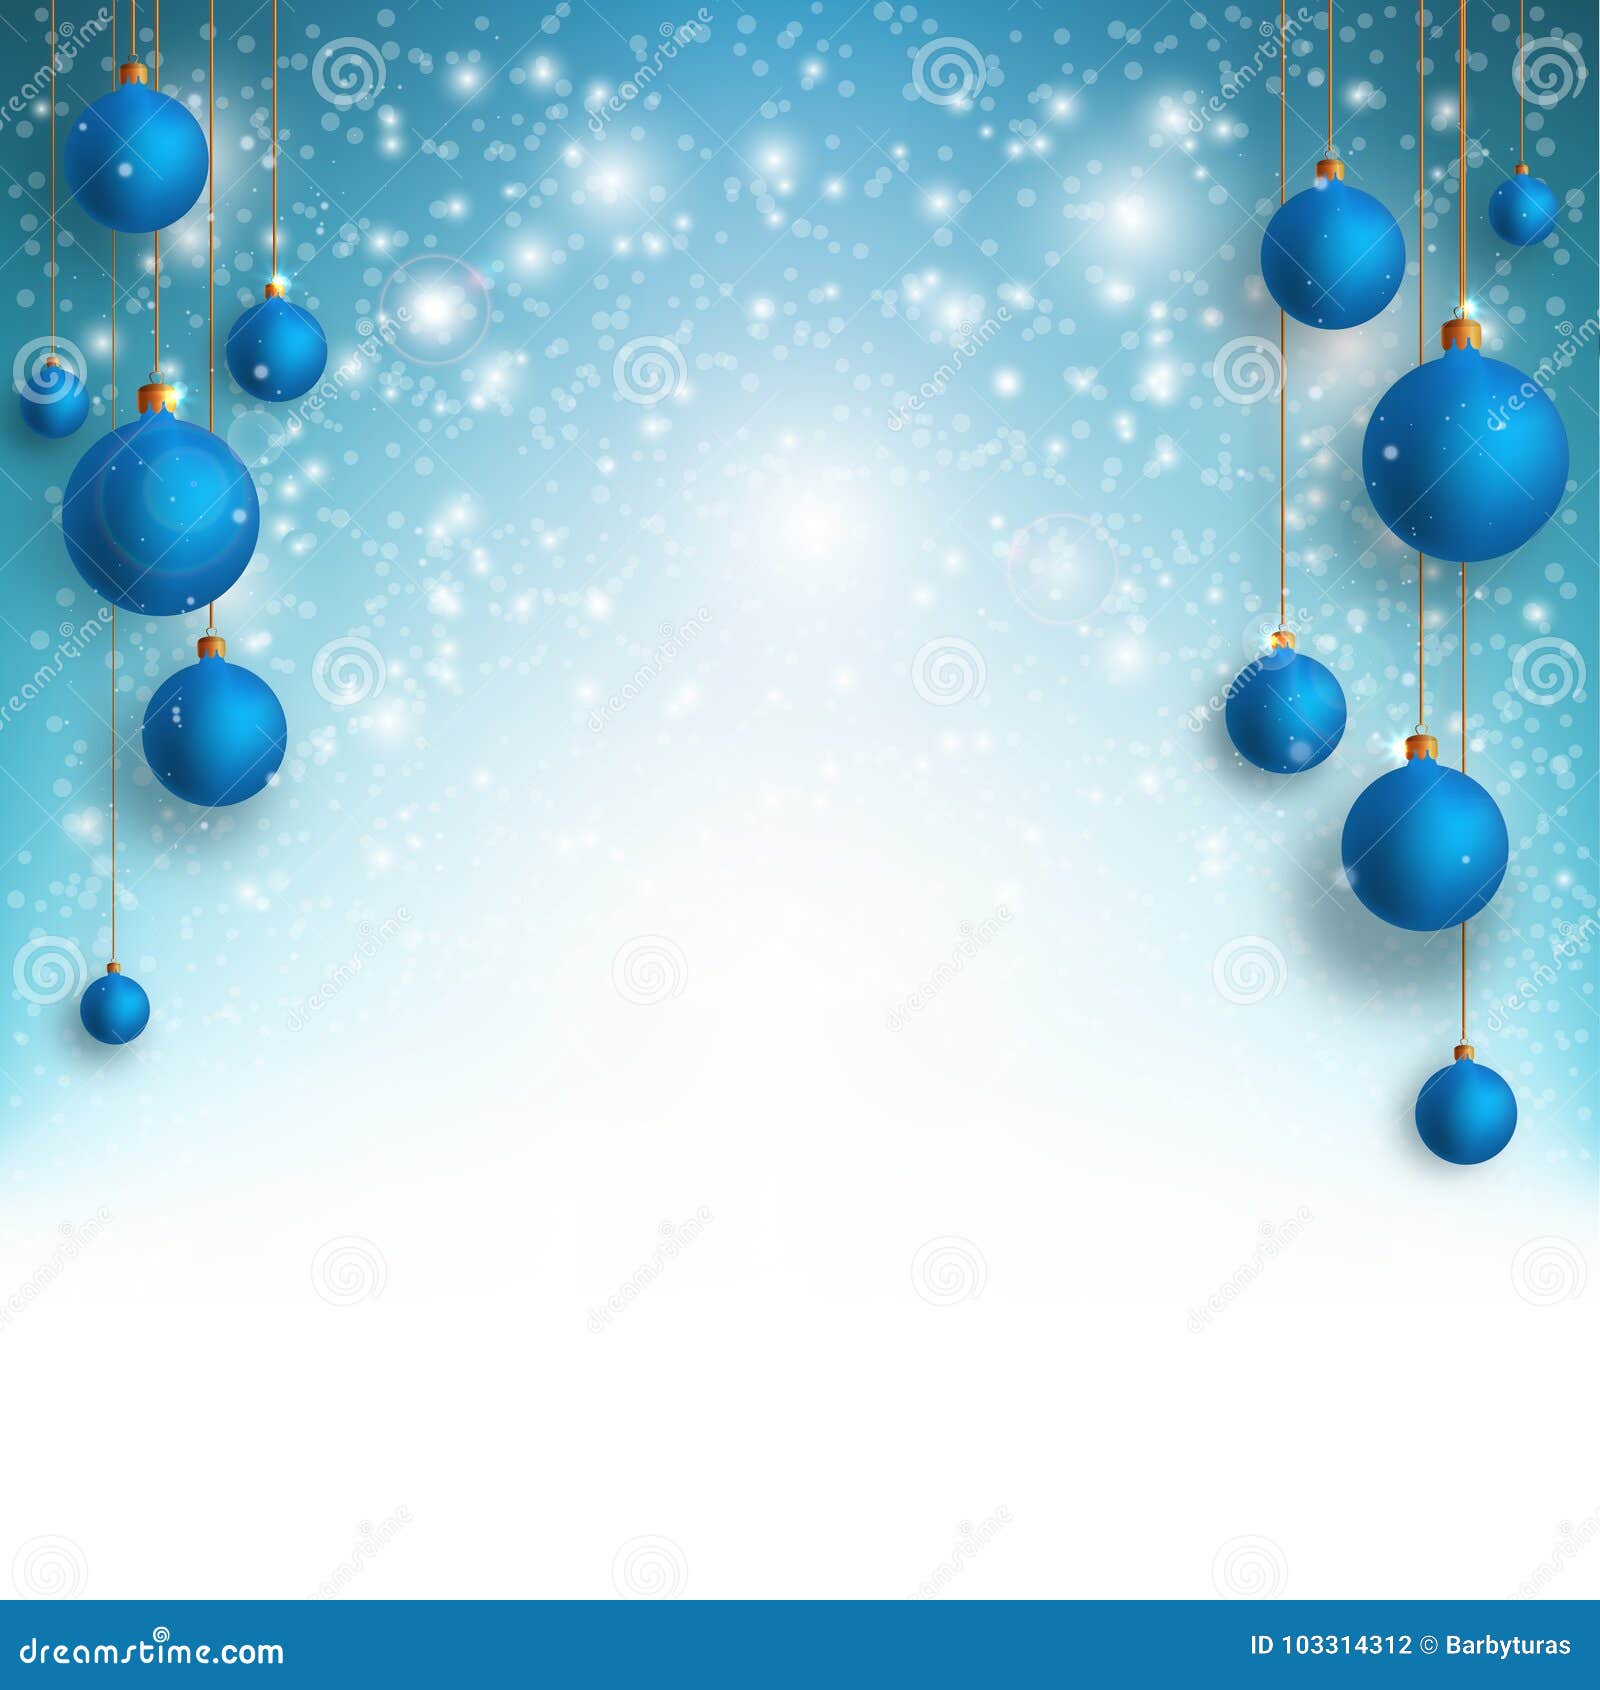 Christmas Background with Blue Christmas Balls and Snow for Xmas Design  Vector Illustration Stock Illustration  Illustration of present elegant  103314647